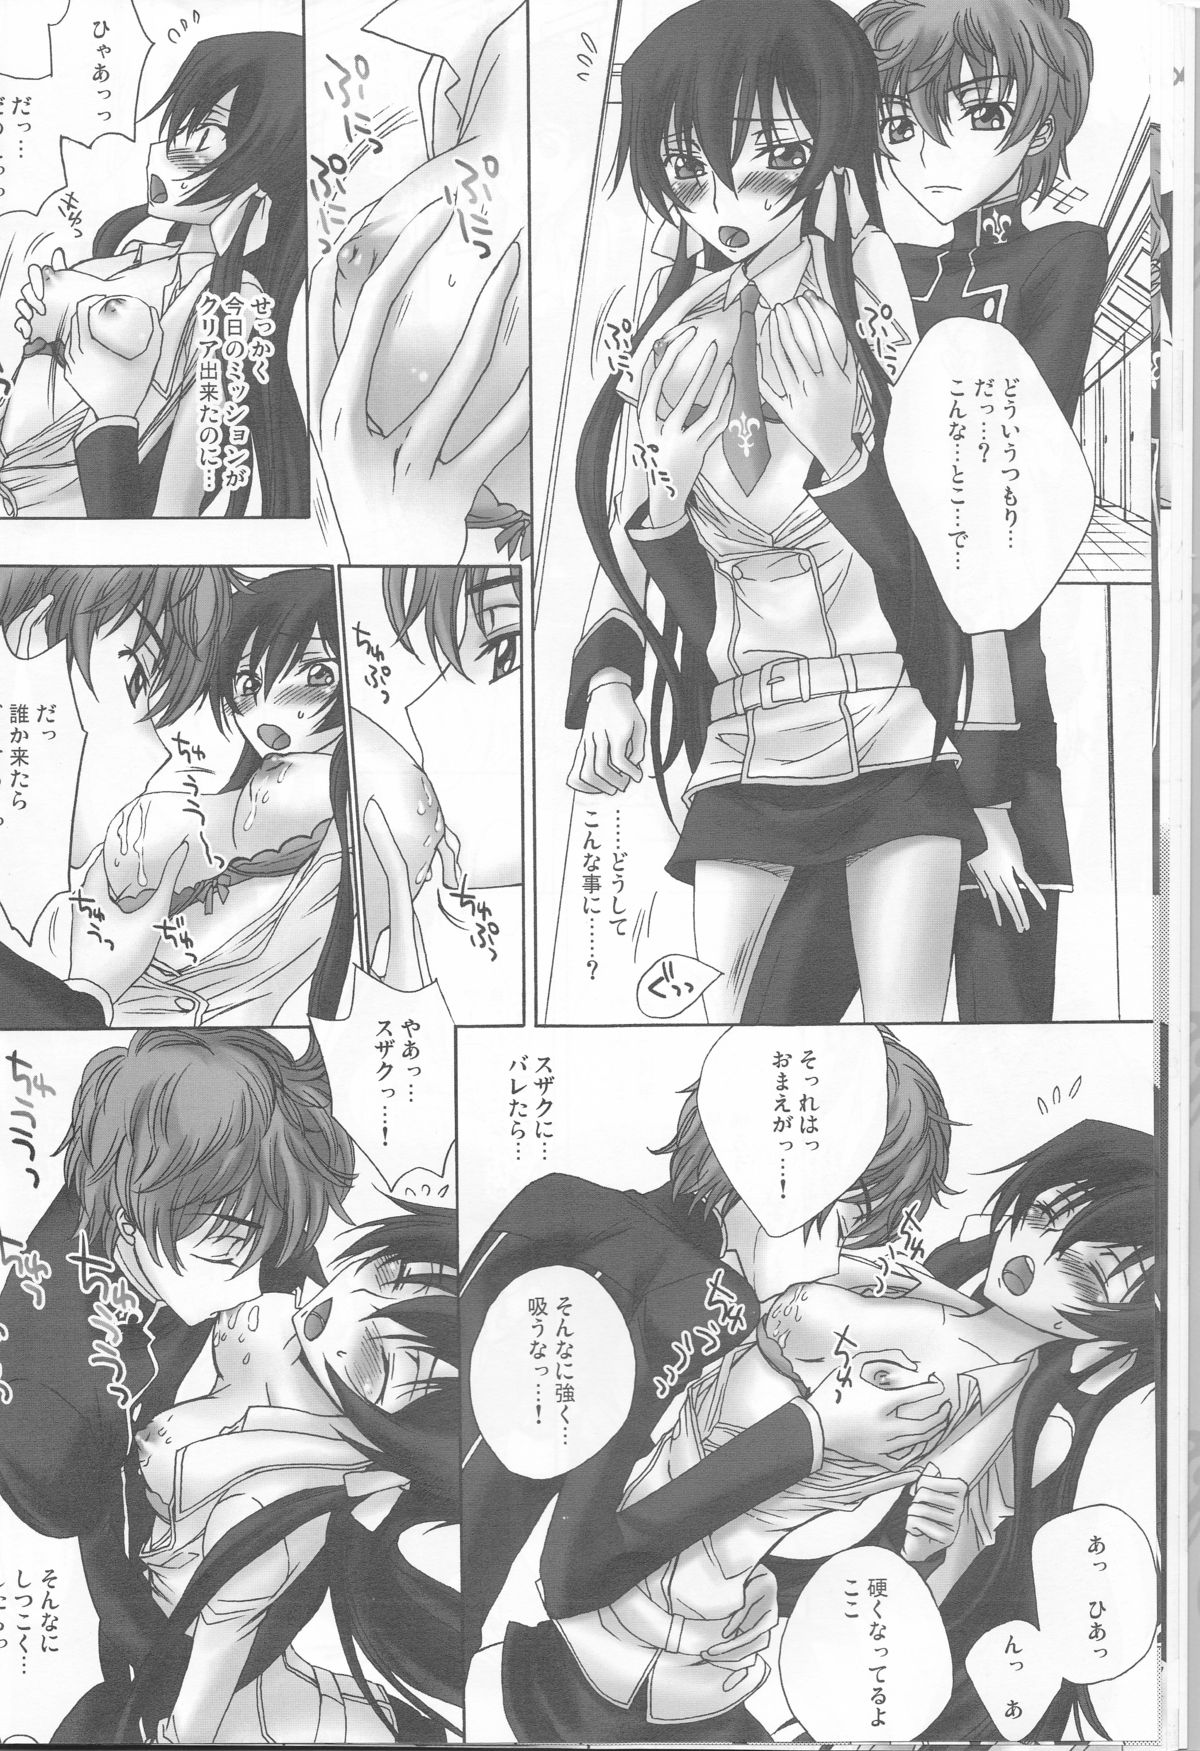 [MAX&COOL. (Sawamura Kina)] Lyrical Rule StrikerS (CODE GEASS: Lelouch of the Rebellion) page 10 full